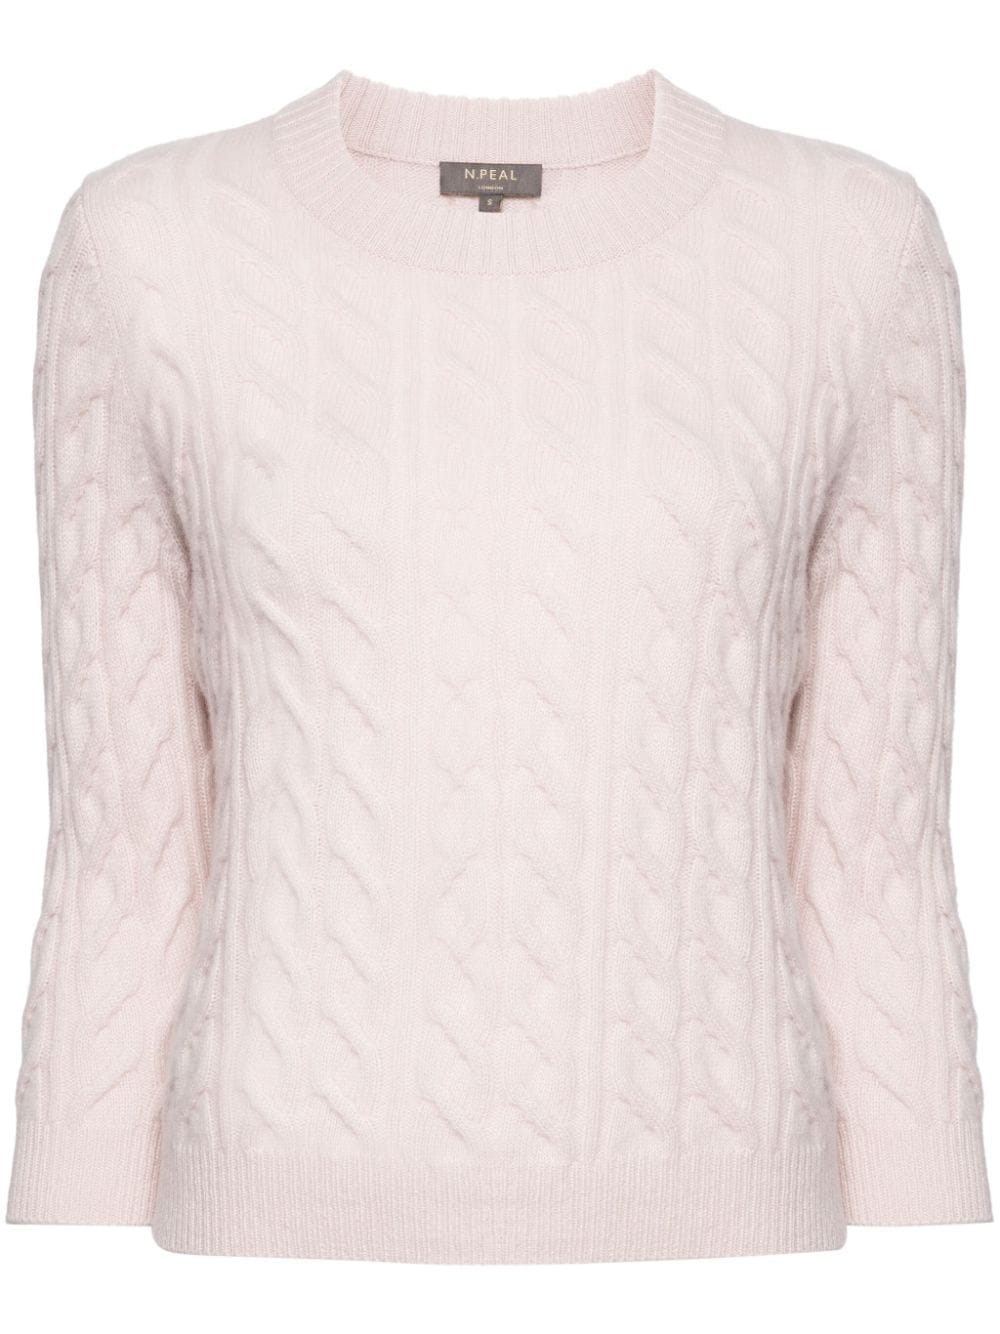 N.Peal cable-knit cashmere jumper - Pink von N.Peal